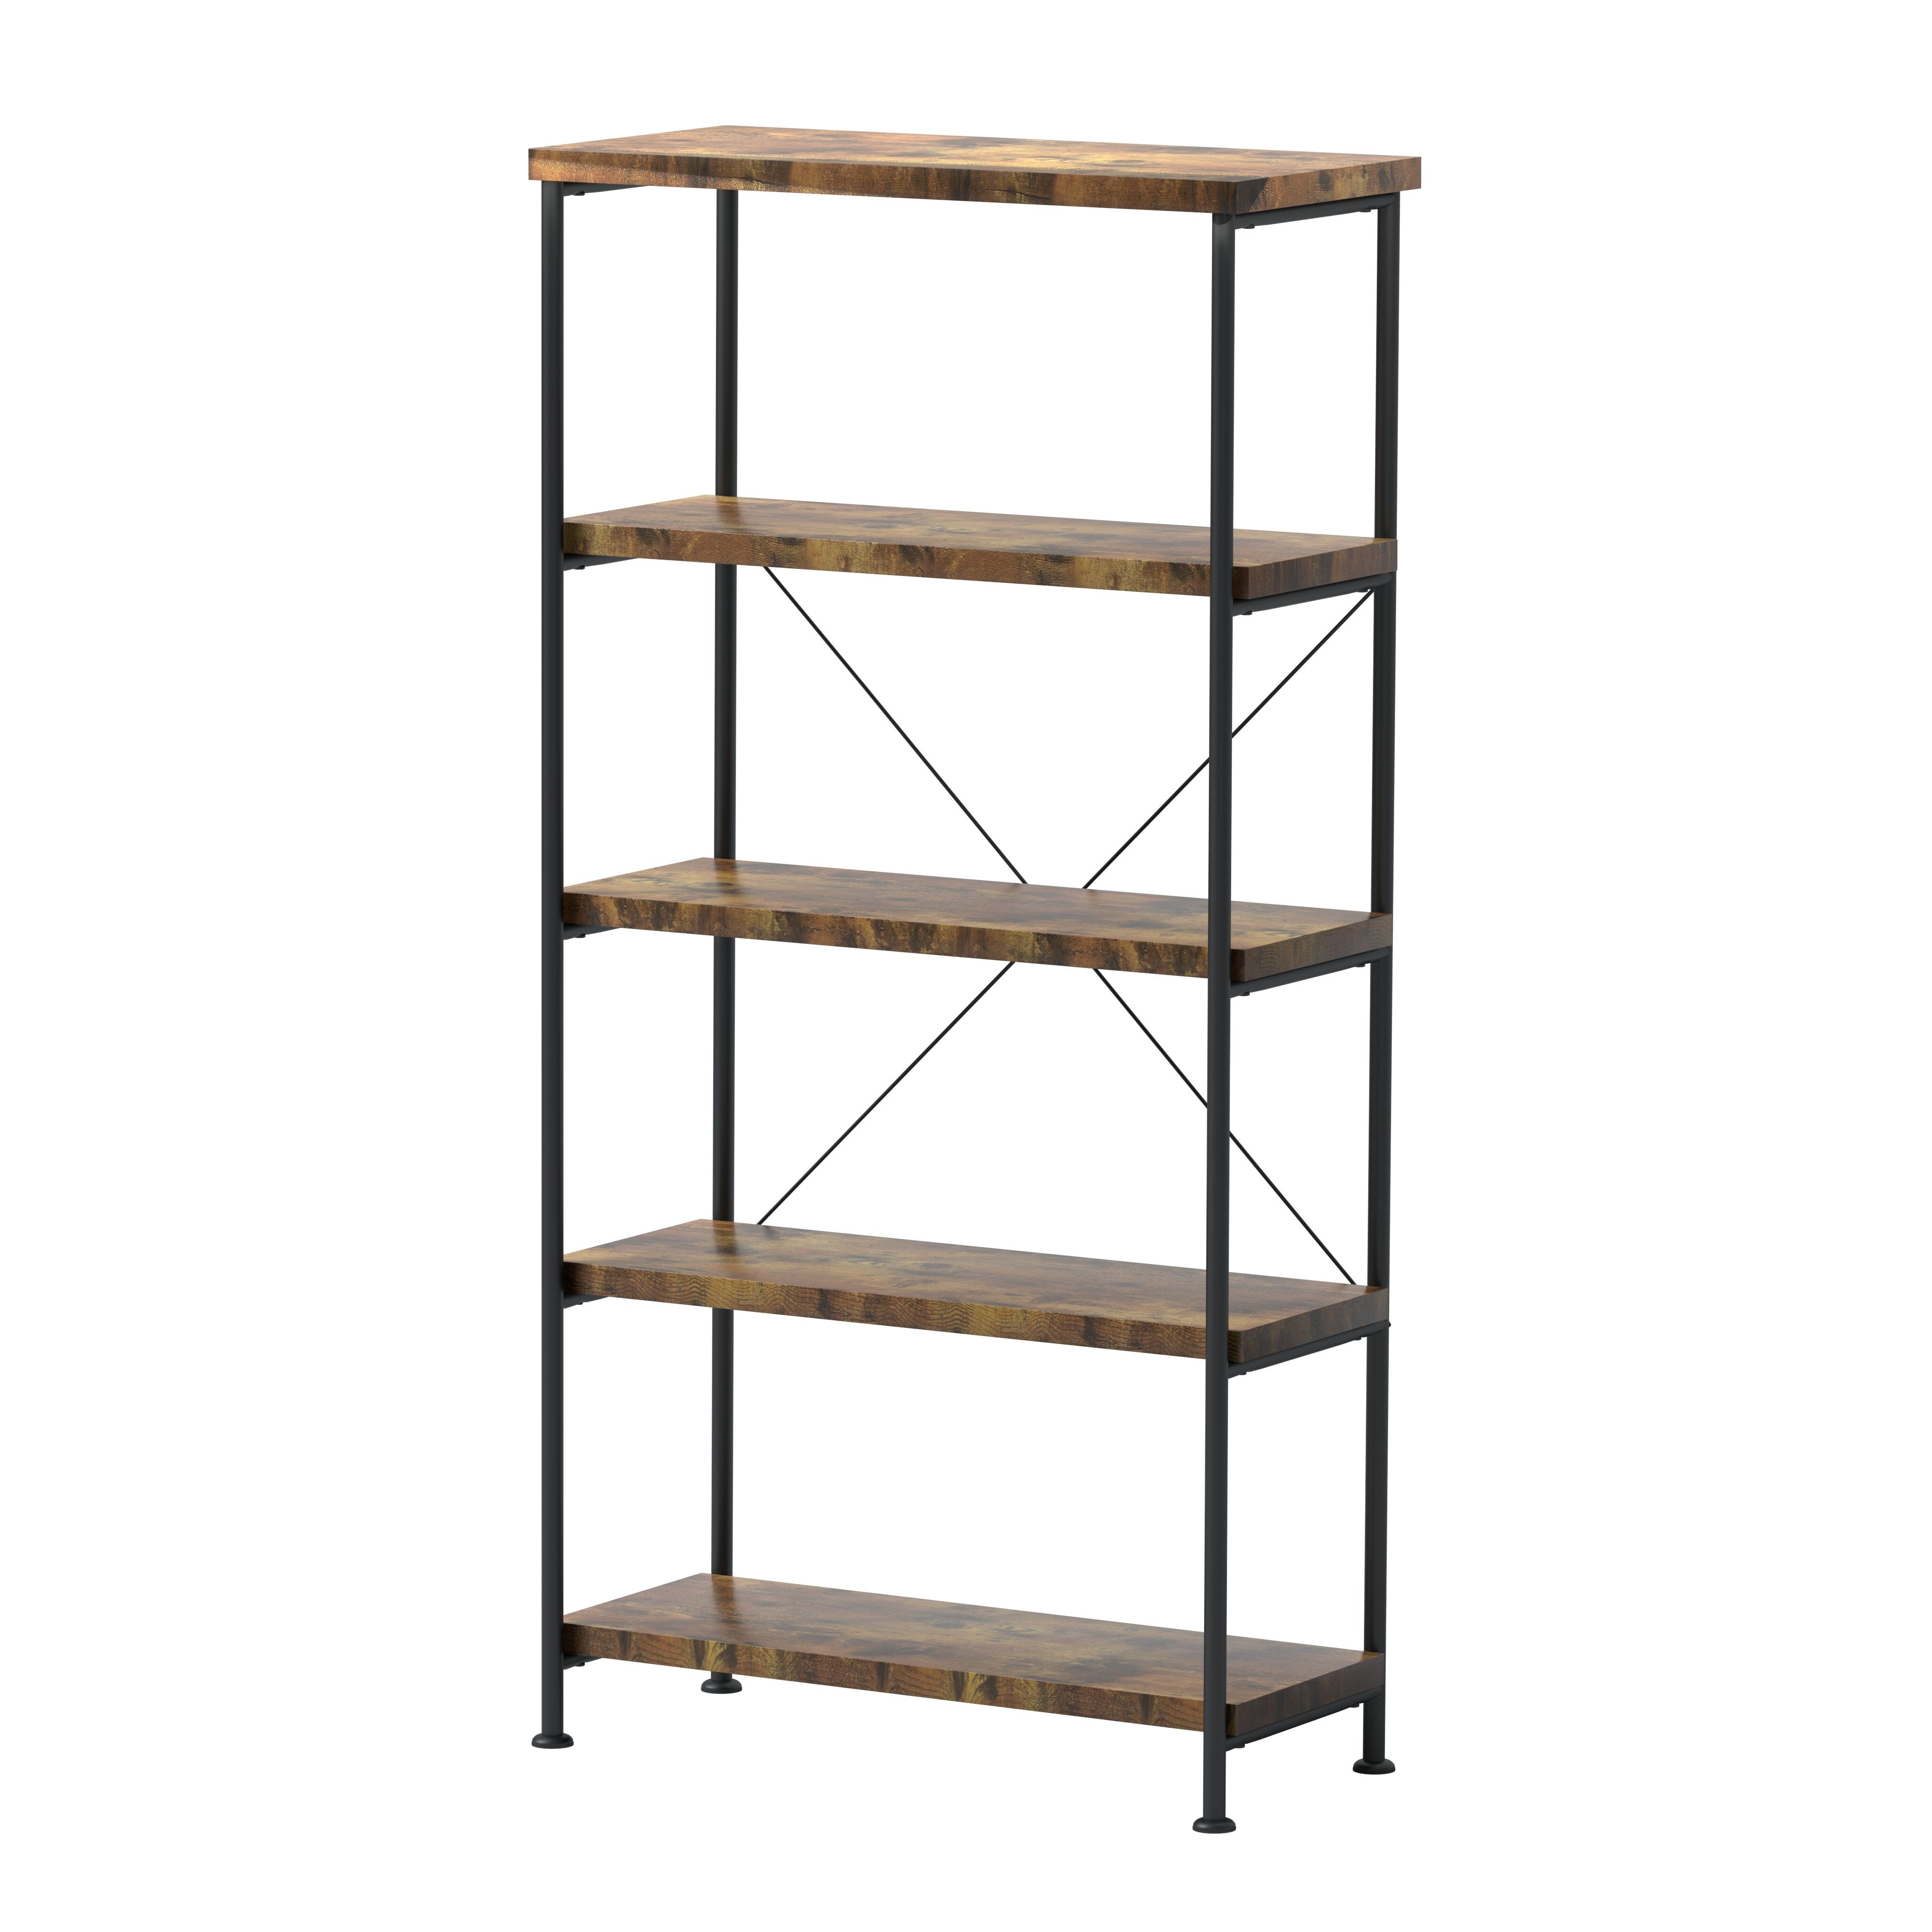 2020 Farmhouse & Rustic Laurel Foundry Modern Farmhouse Bookcases With Adair Etagere Bookcases (View 16 of 20)